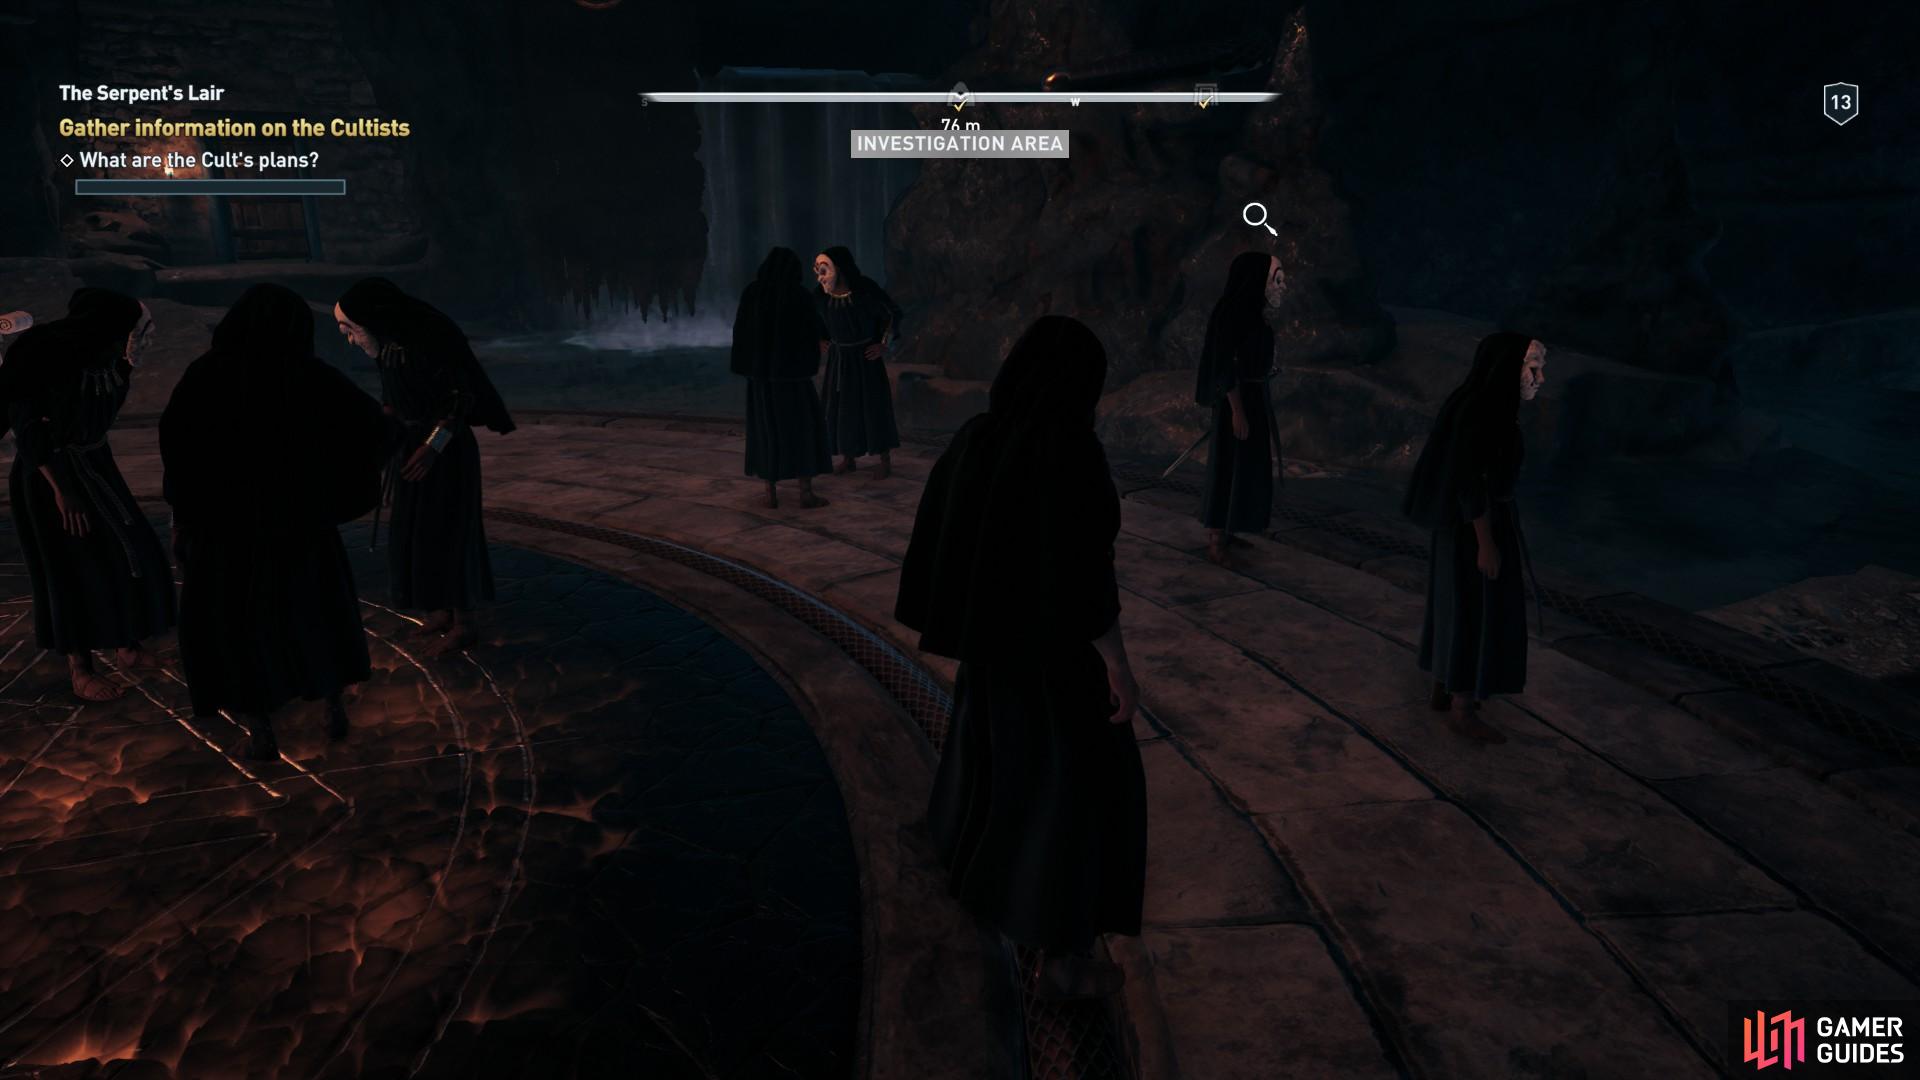 Walk towards the two cultists who have a search icon above their head and speak with them.